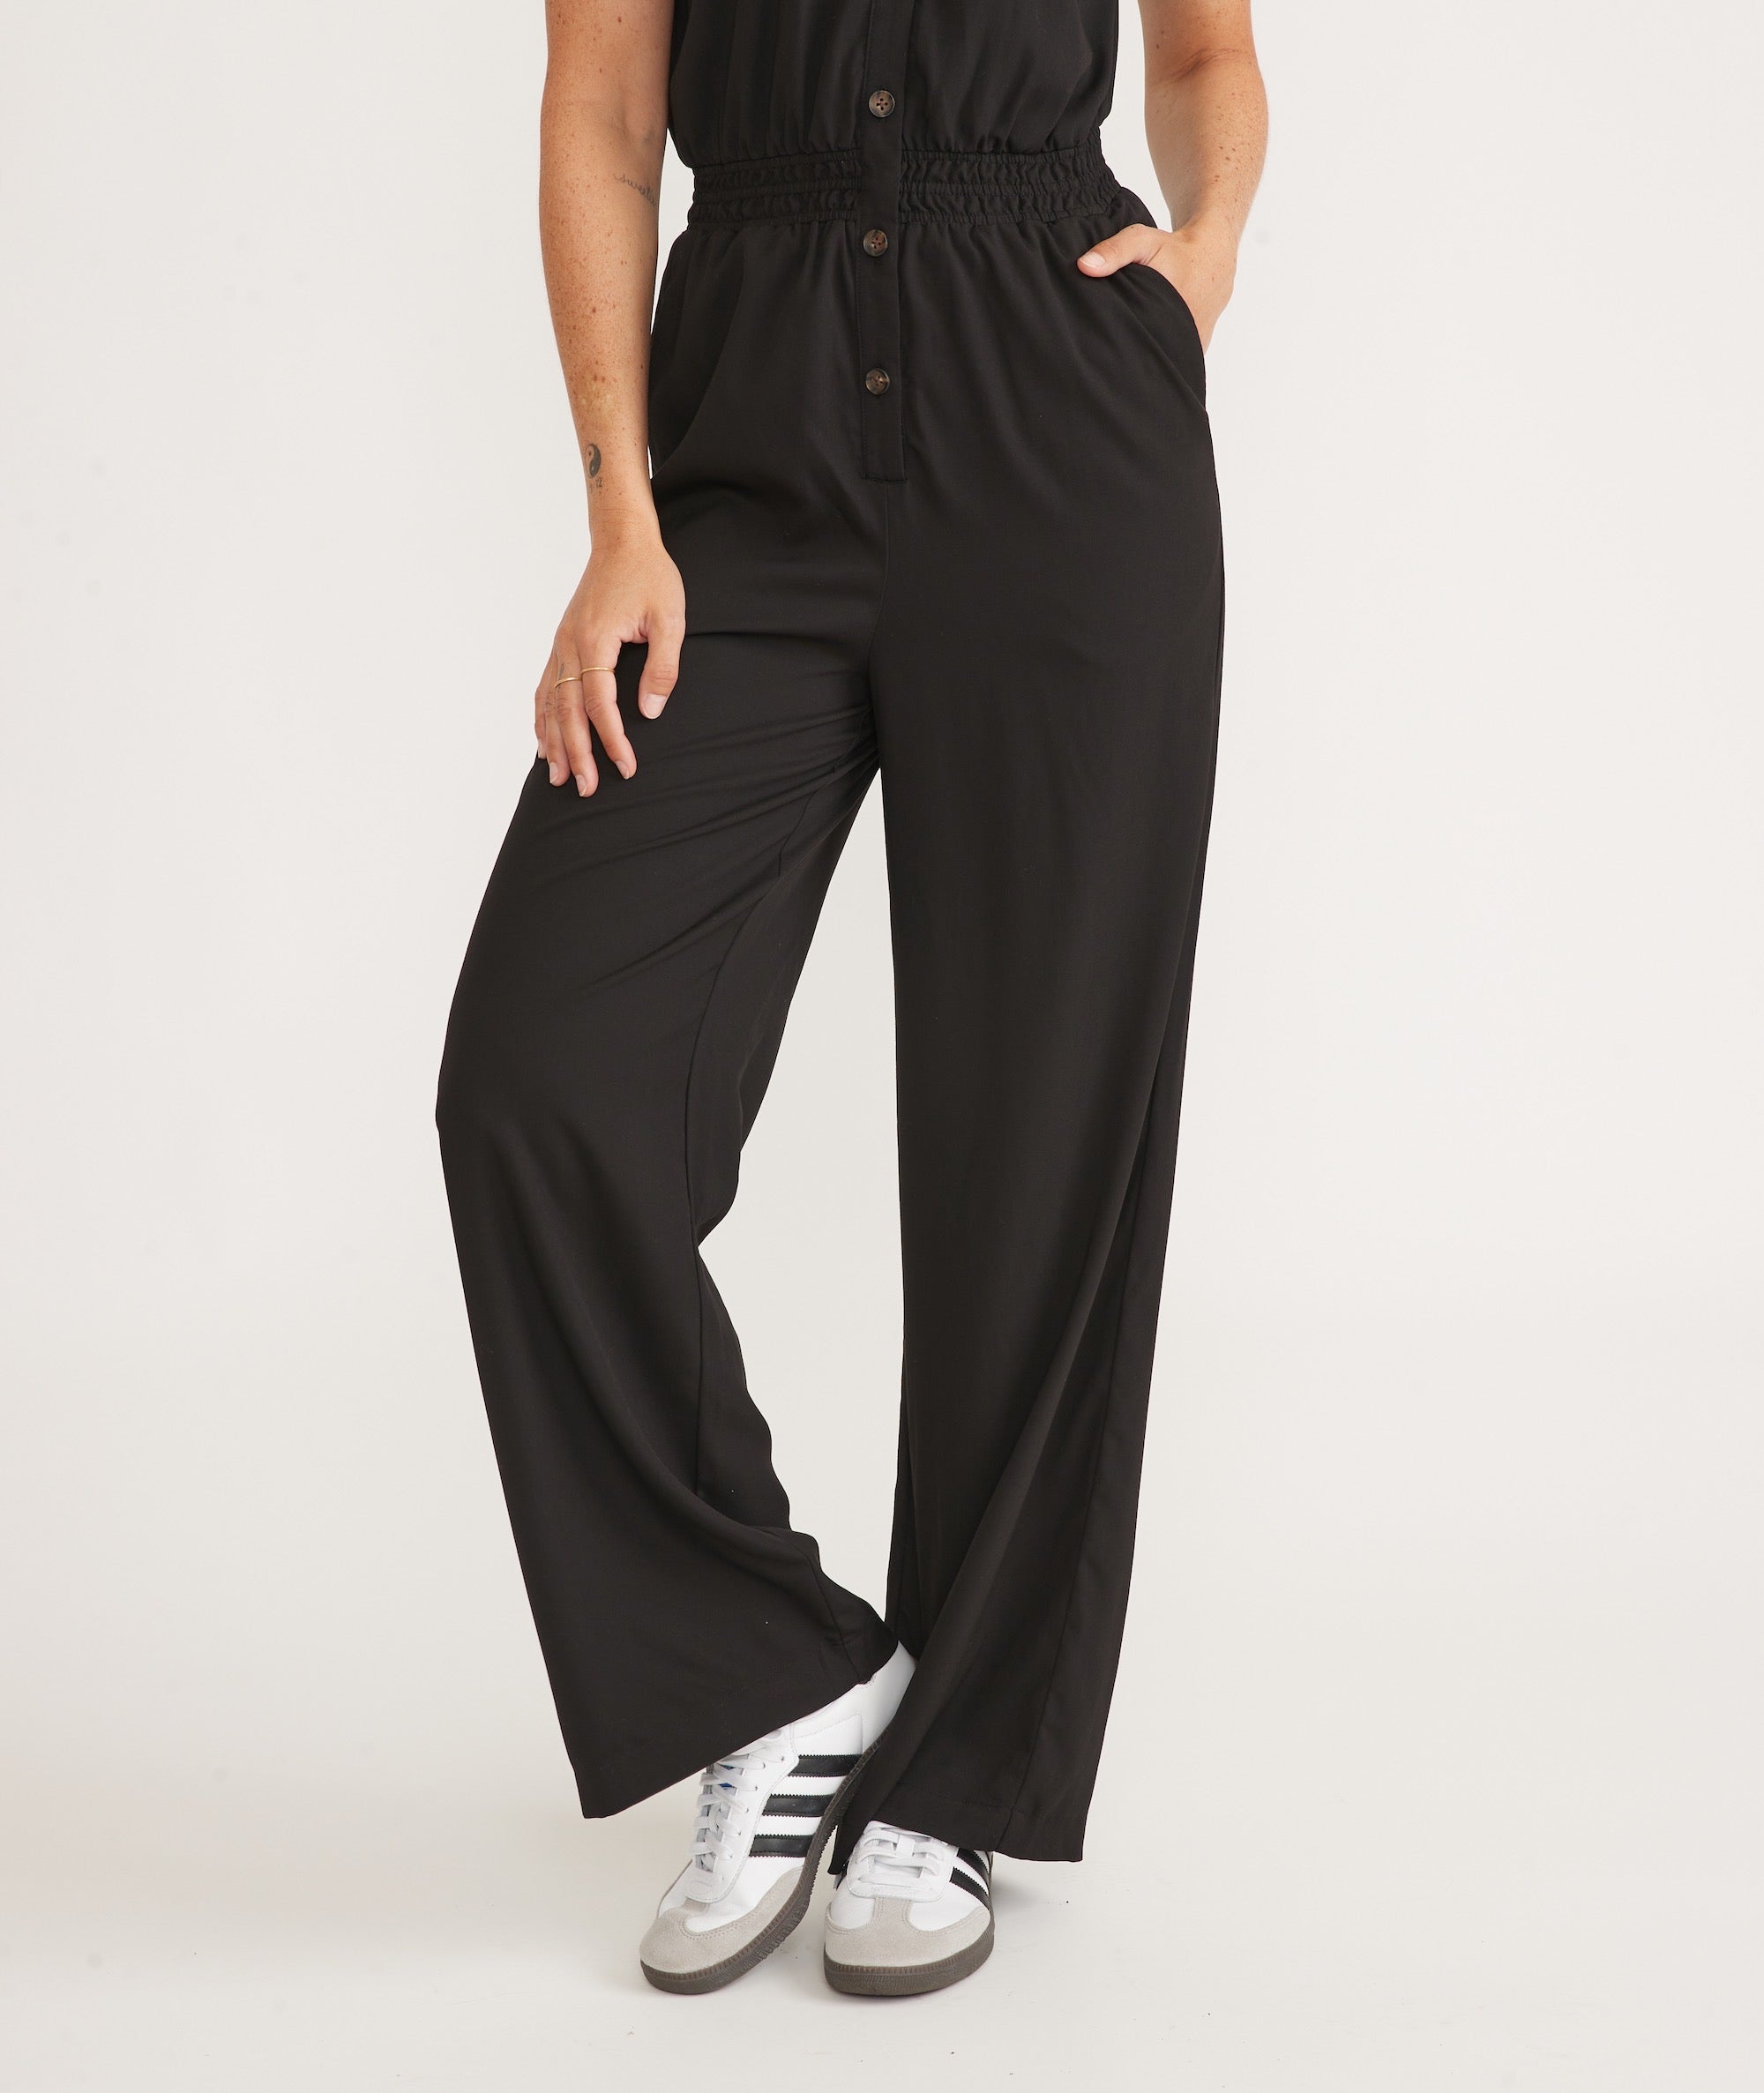 Jumpsuits for Women Casual, Wide Leg Jumpsuits for Women Spaghetti Strap  Stretchy Short Pants Overalls with Pockets Clearance Items Under 10 Dollars